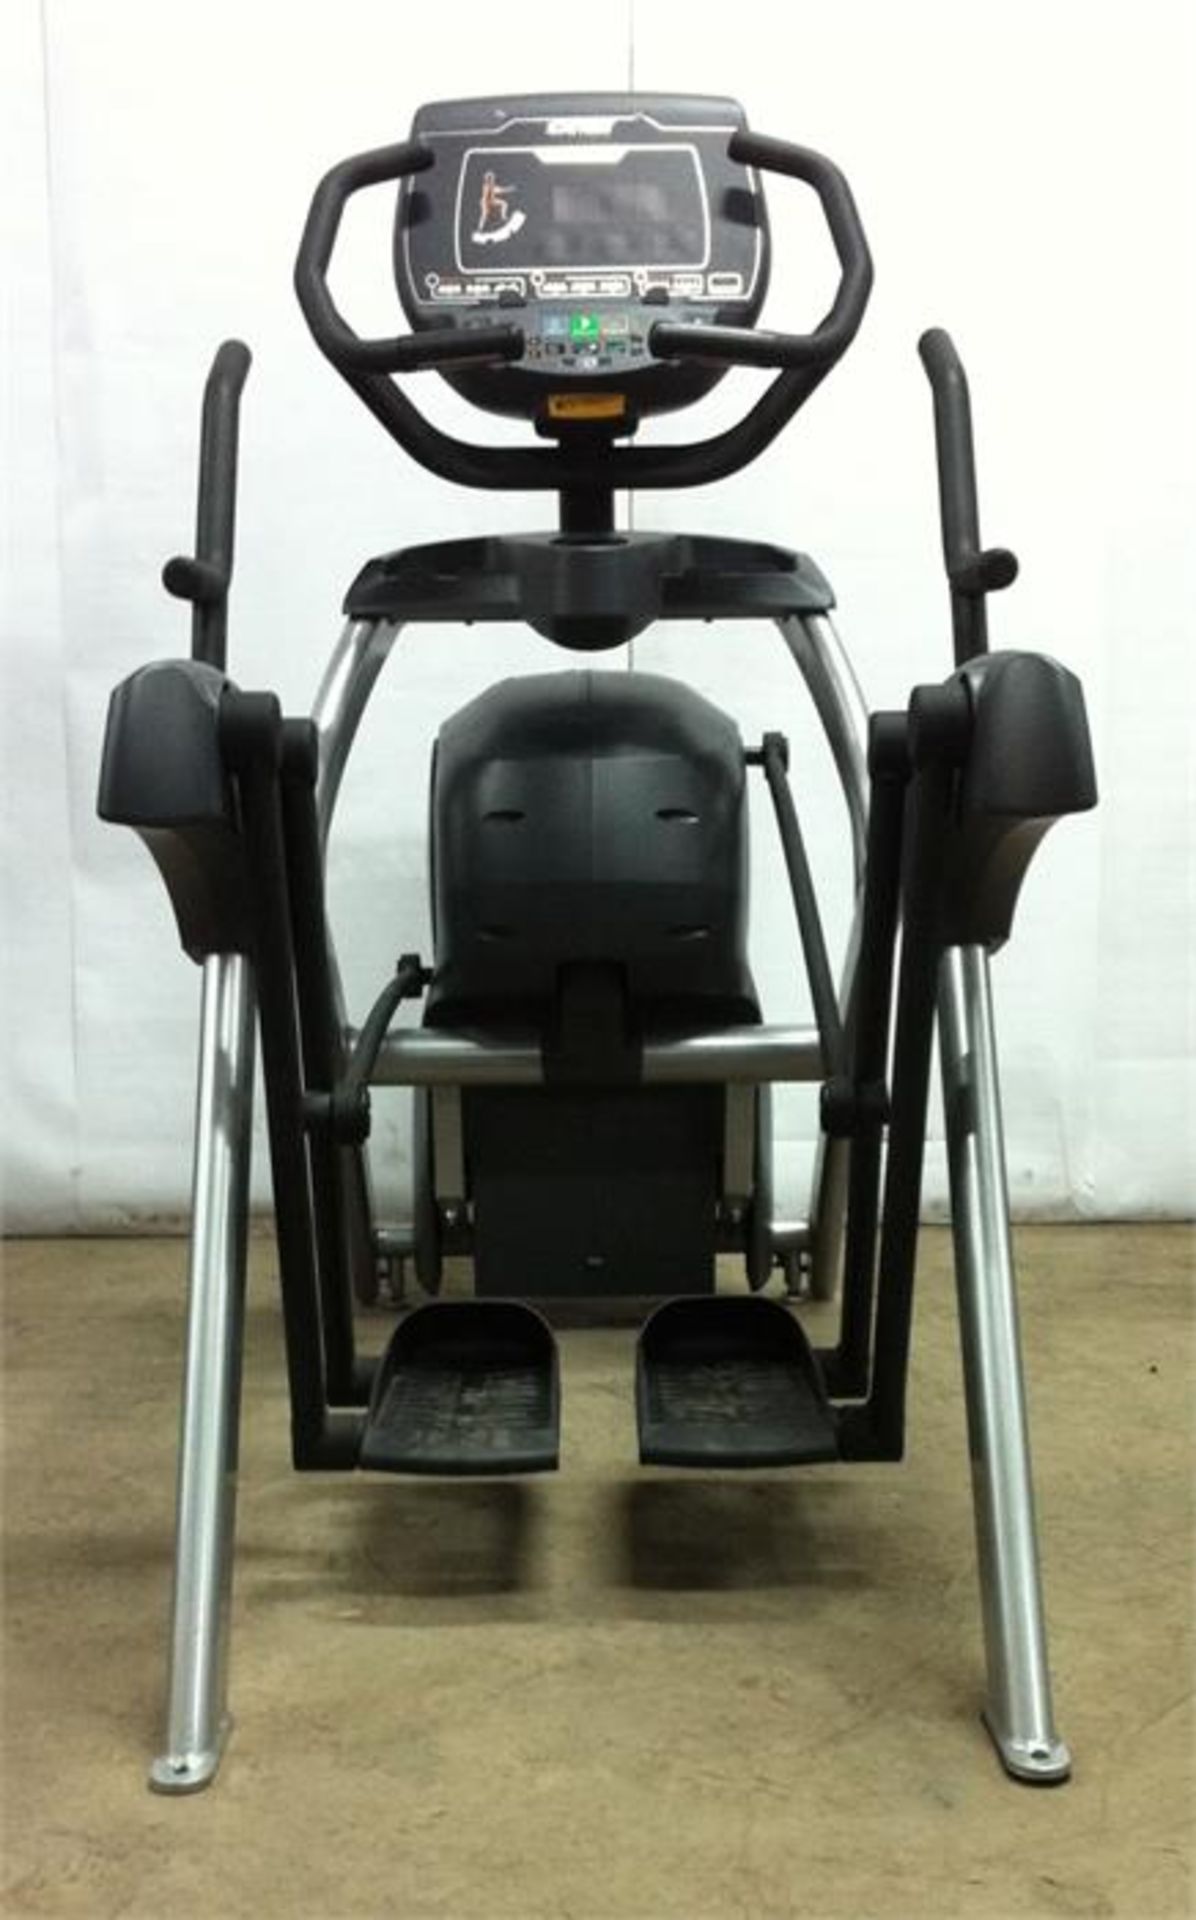 Cybex 625A Total Body Arc Trainer - Image 7 of 8